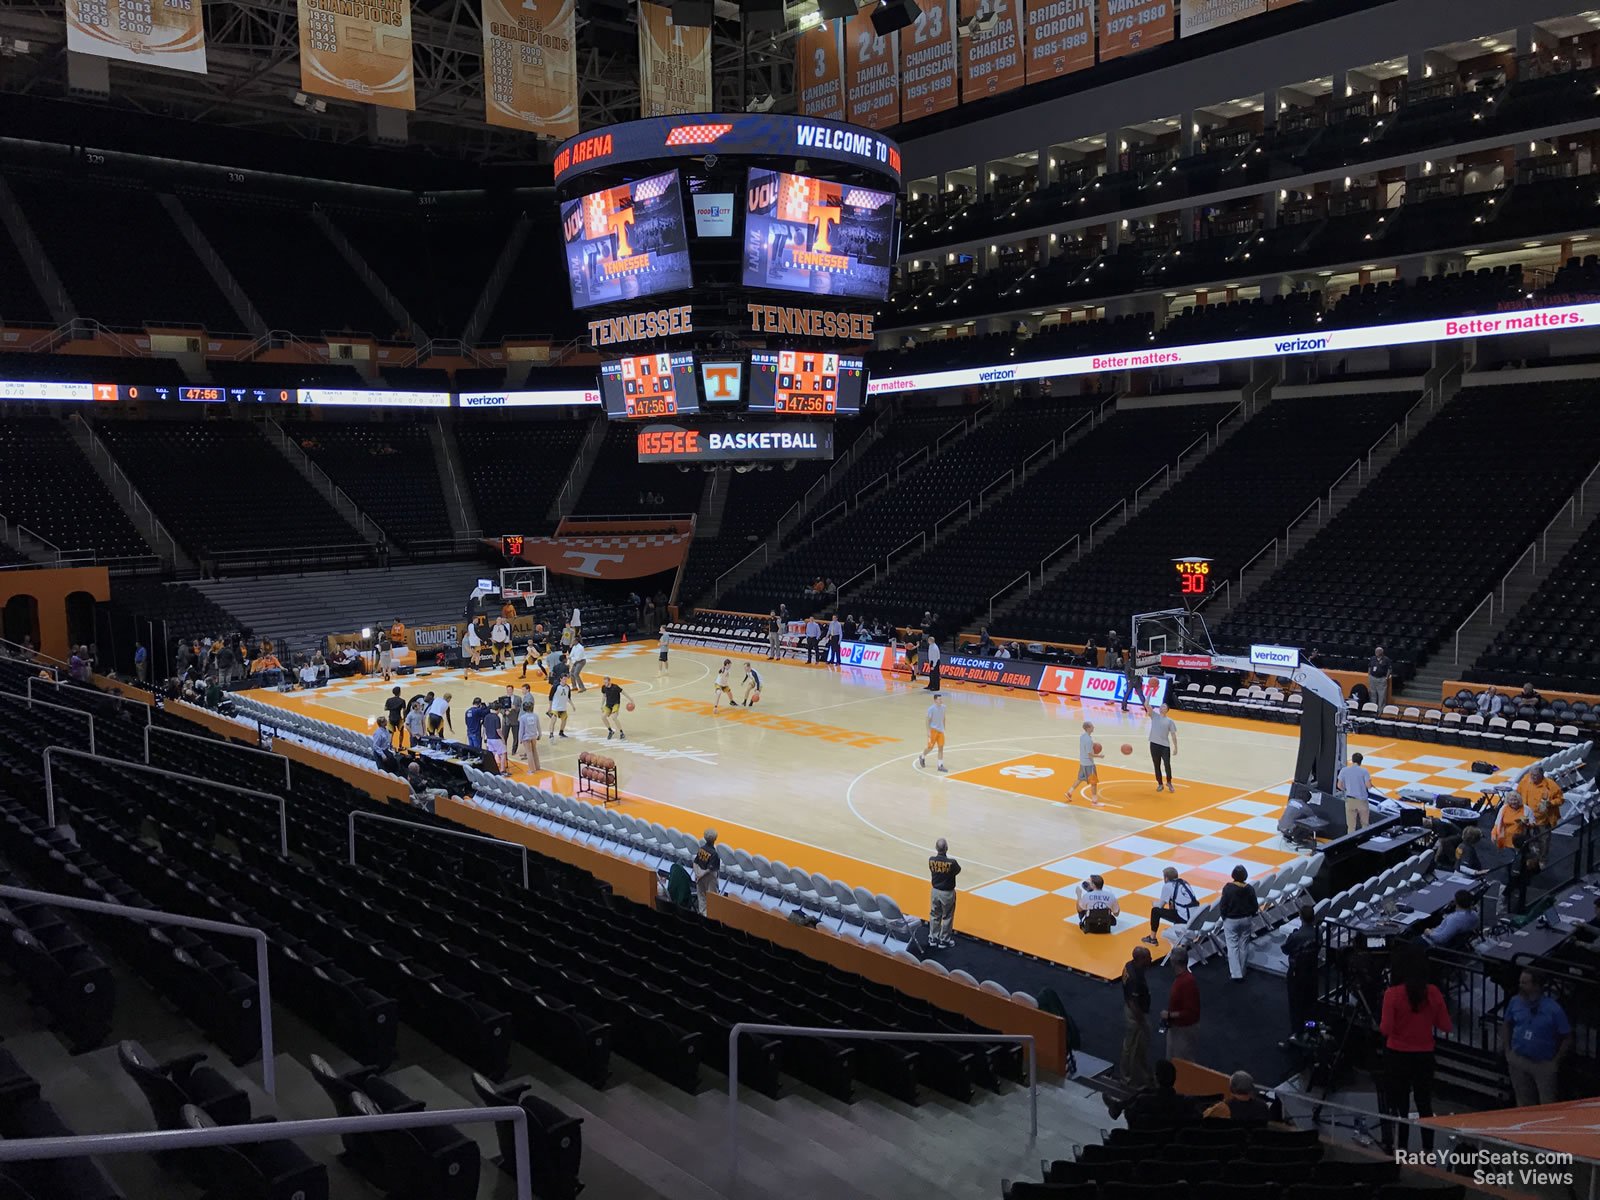 section 117, row 17 seat view  - thompson-boling arena